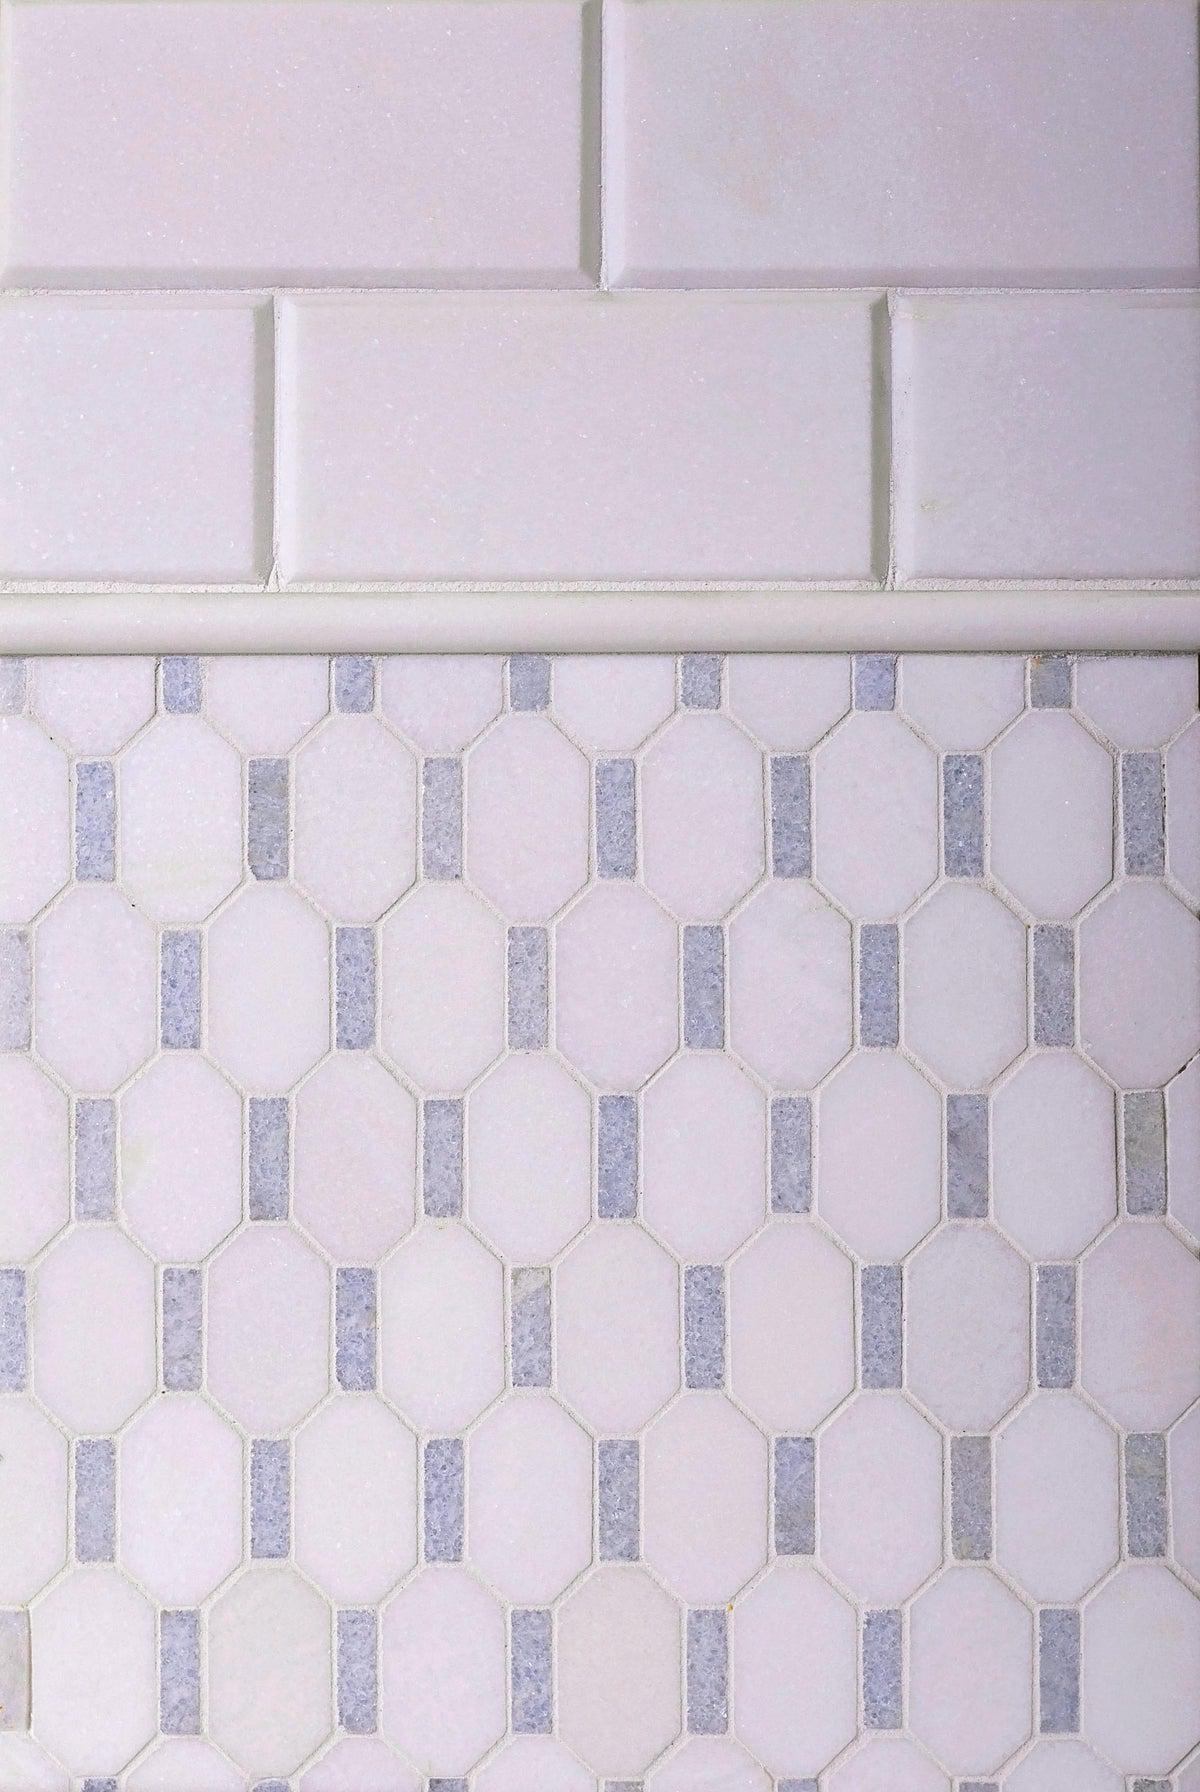 Two types of white marble tile for a backsplash